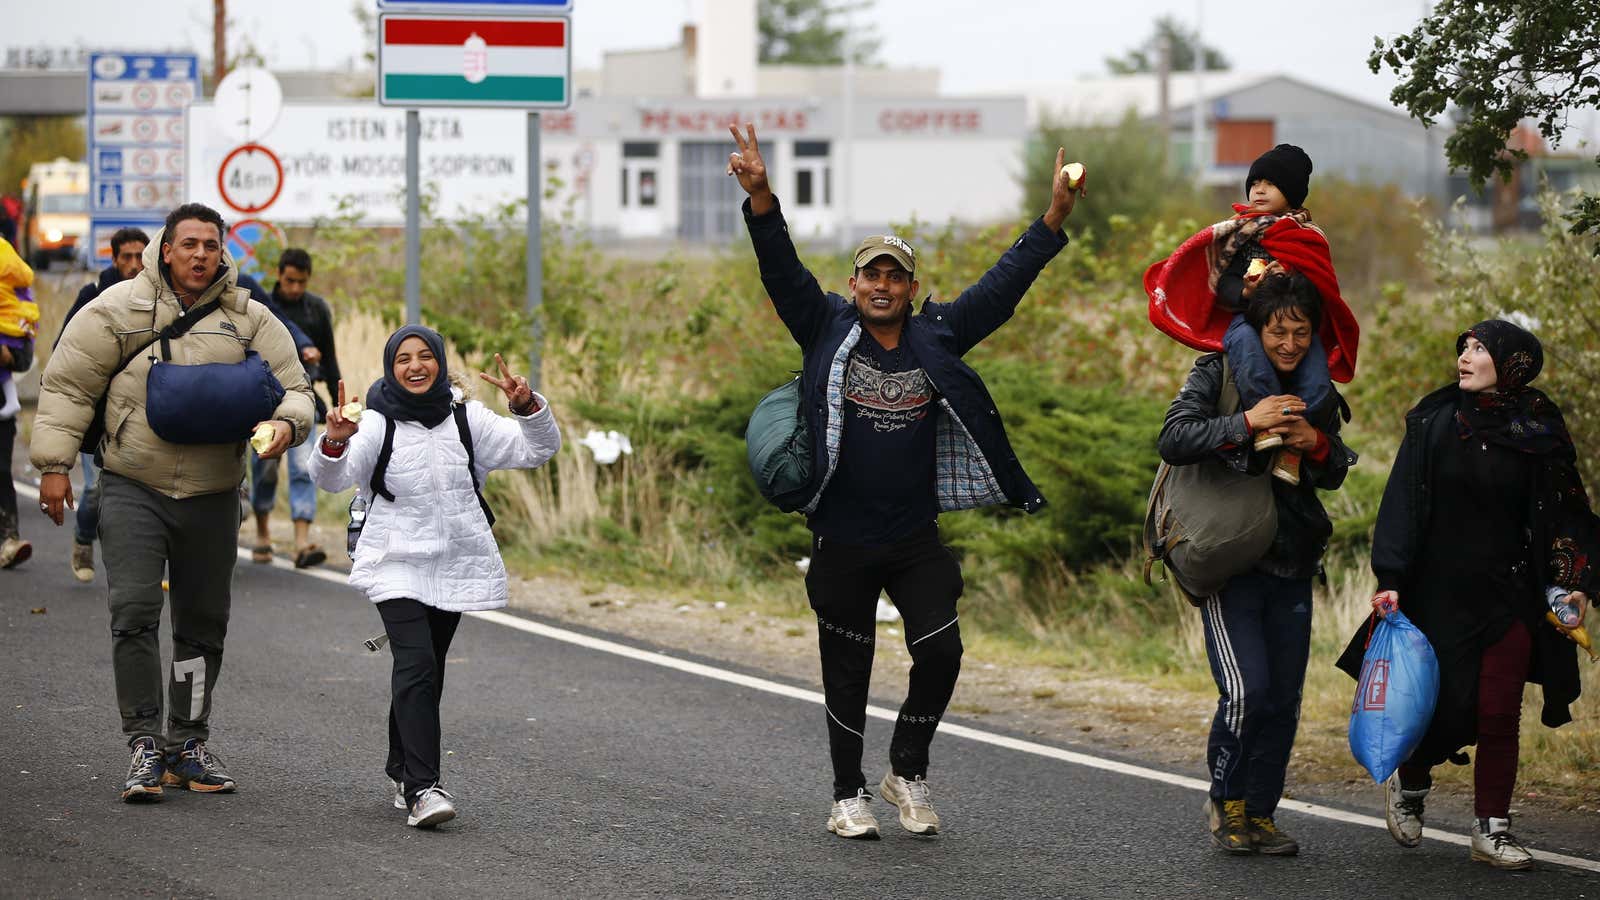 Refugees celebrate as they cross the border from Hungary into Austria in Sep. 2015.